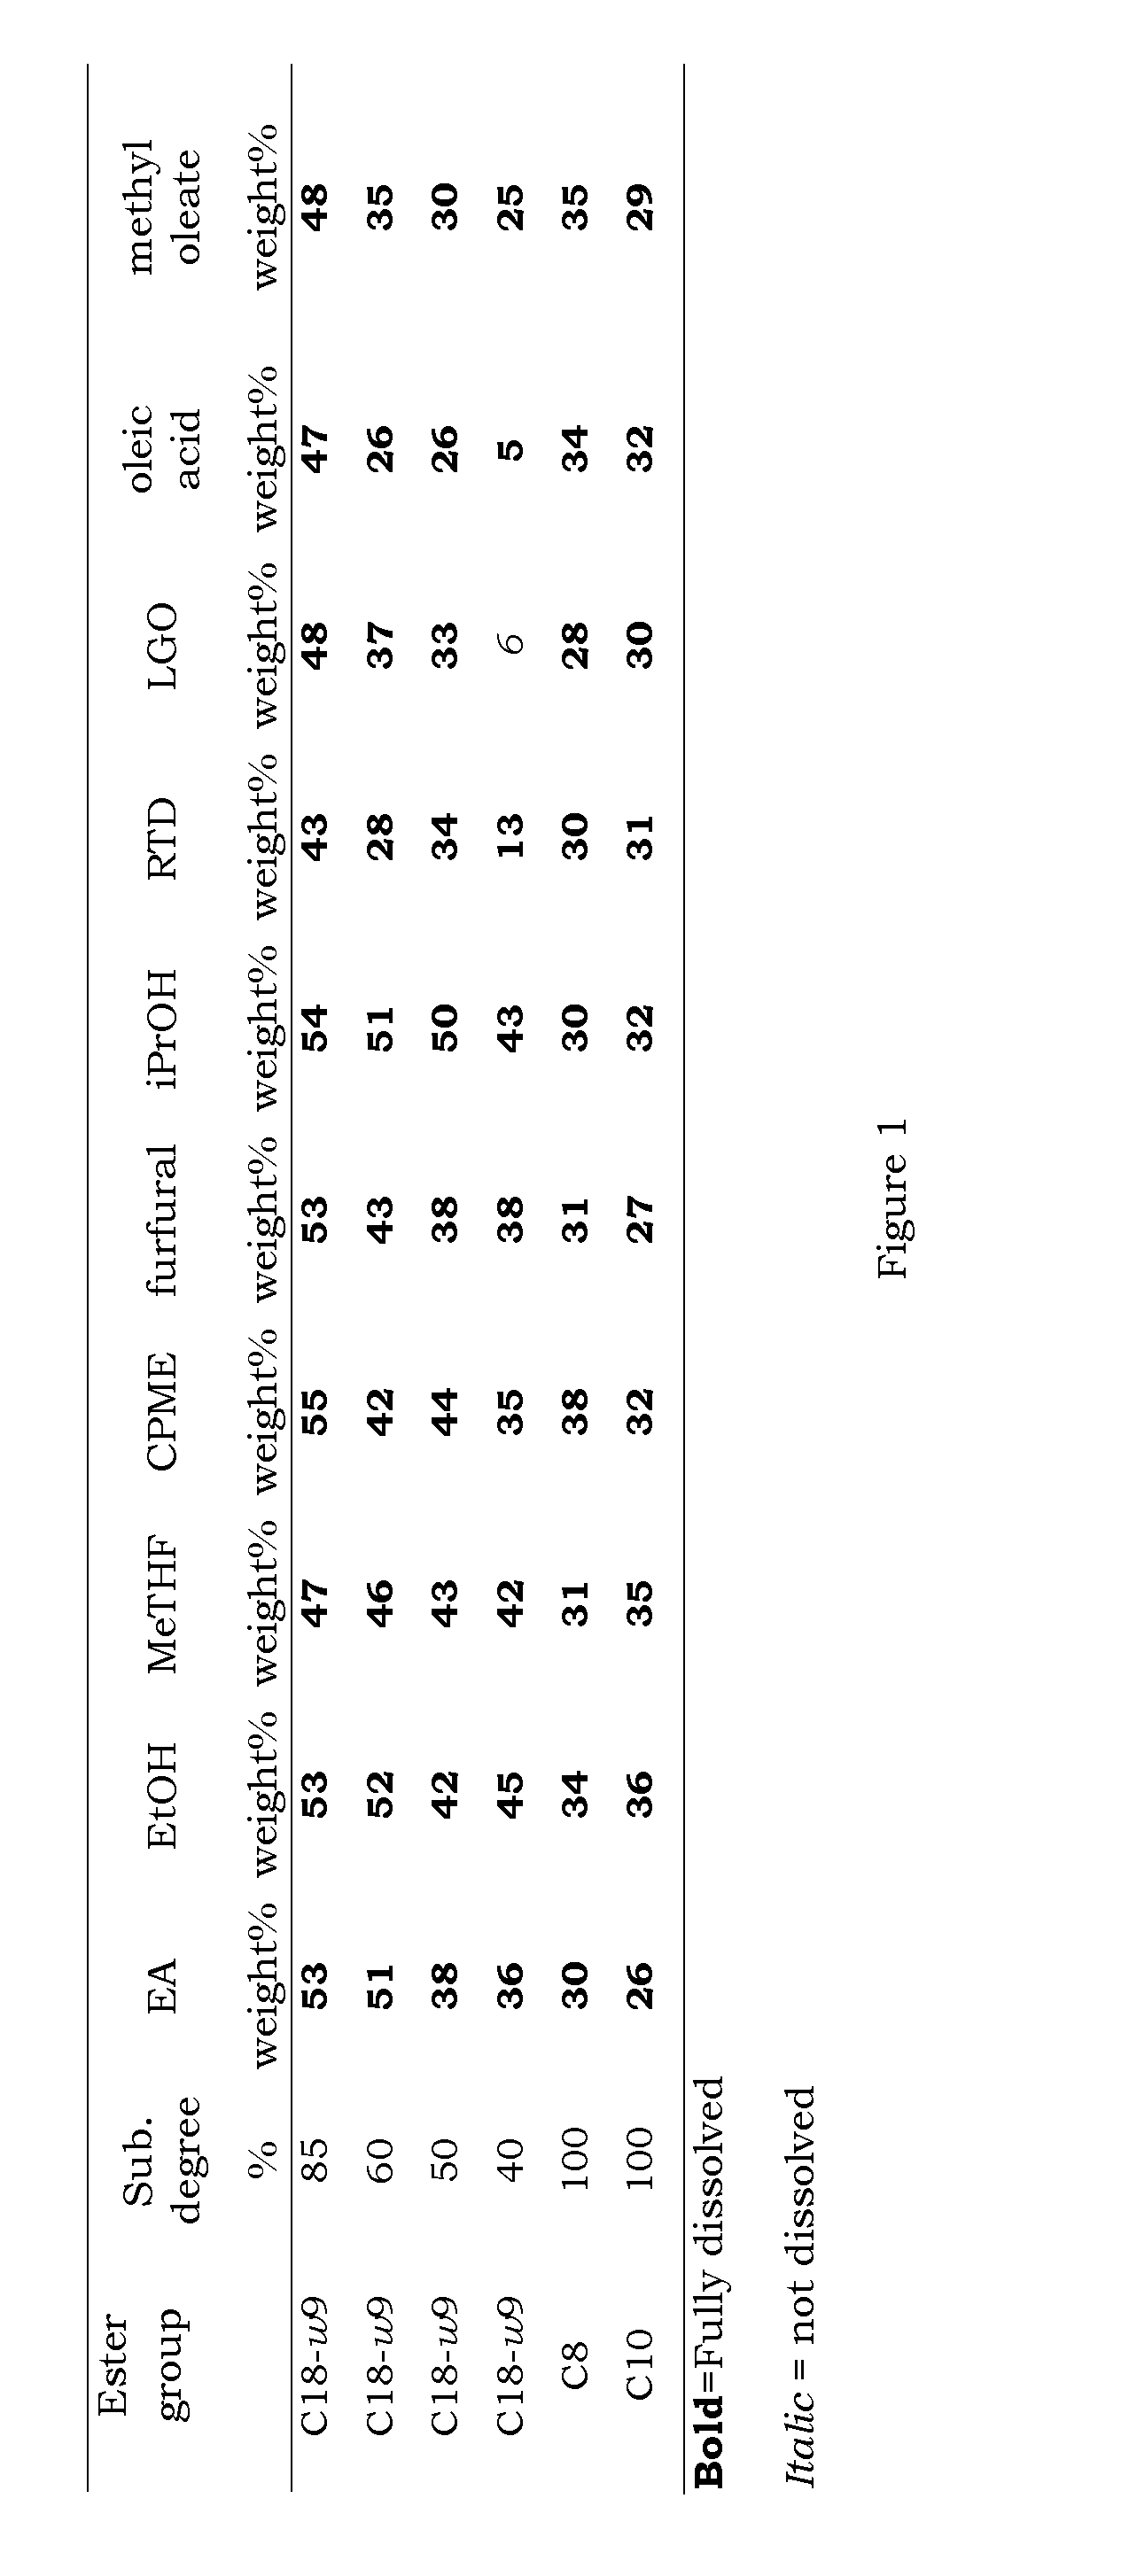 Composition Comprising Esters Of Lignin And Oil Or Fatty Acids